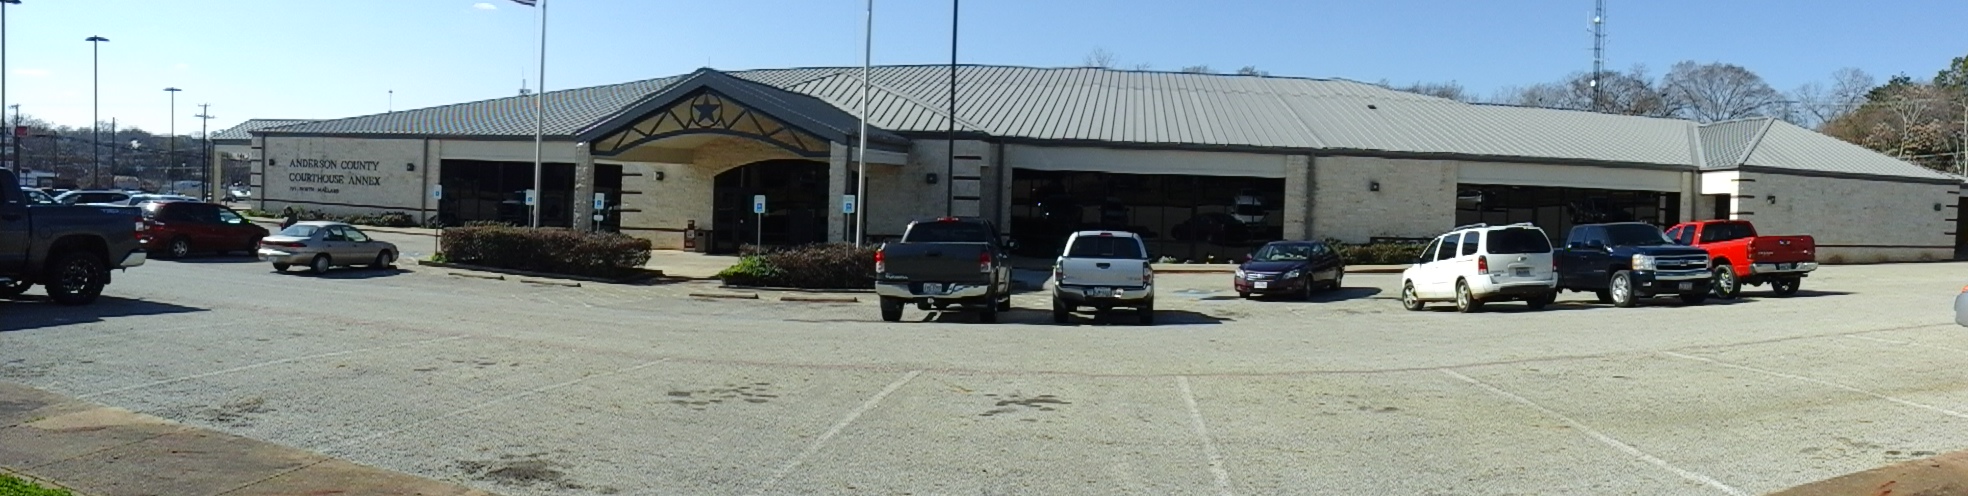 Anderson County Court House Annex